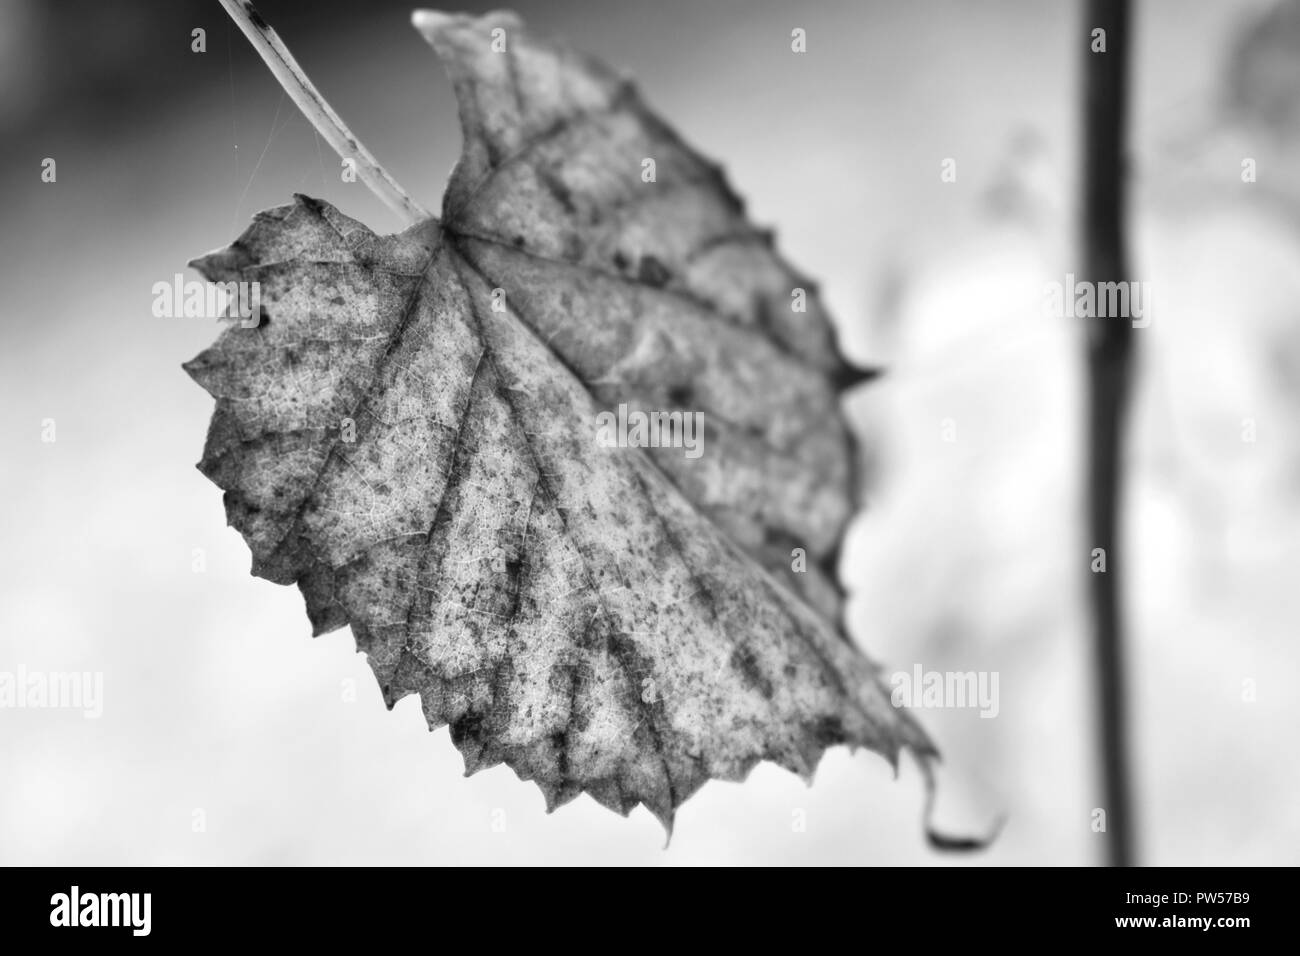 Leaf In Black And White Stock Photo